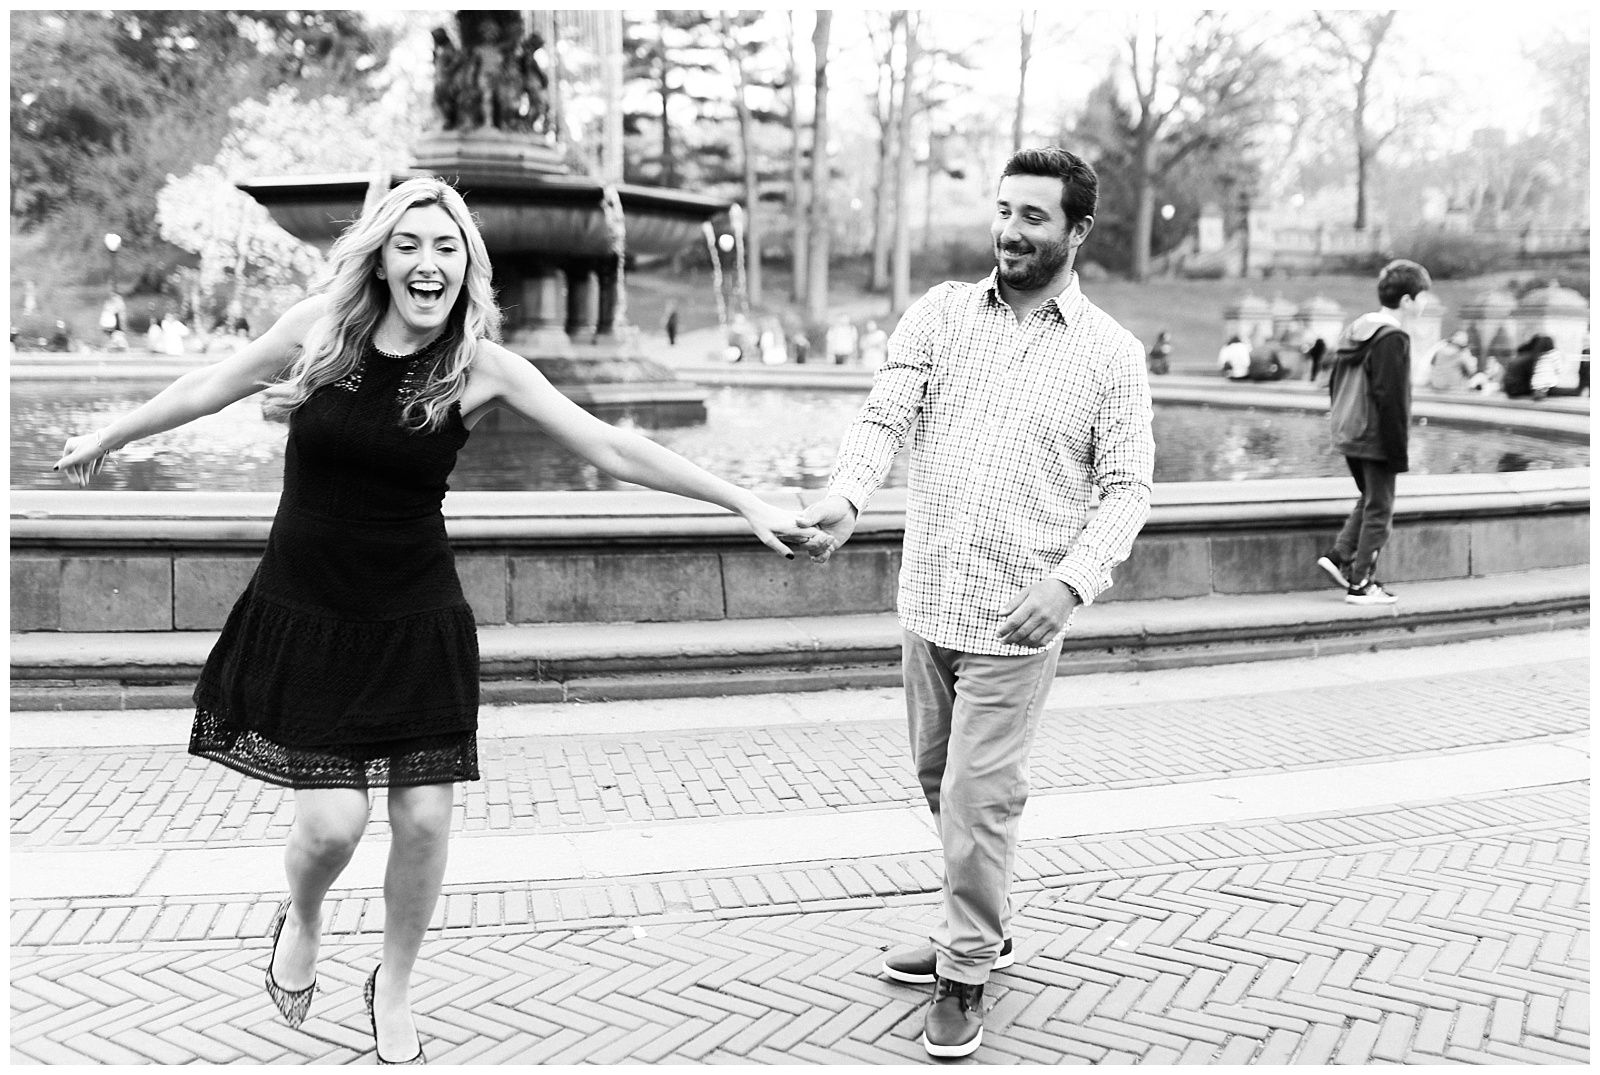 A couple laughs together holding hands in front of Bethesda Fountain in Central Park.